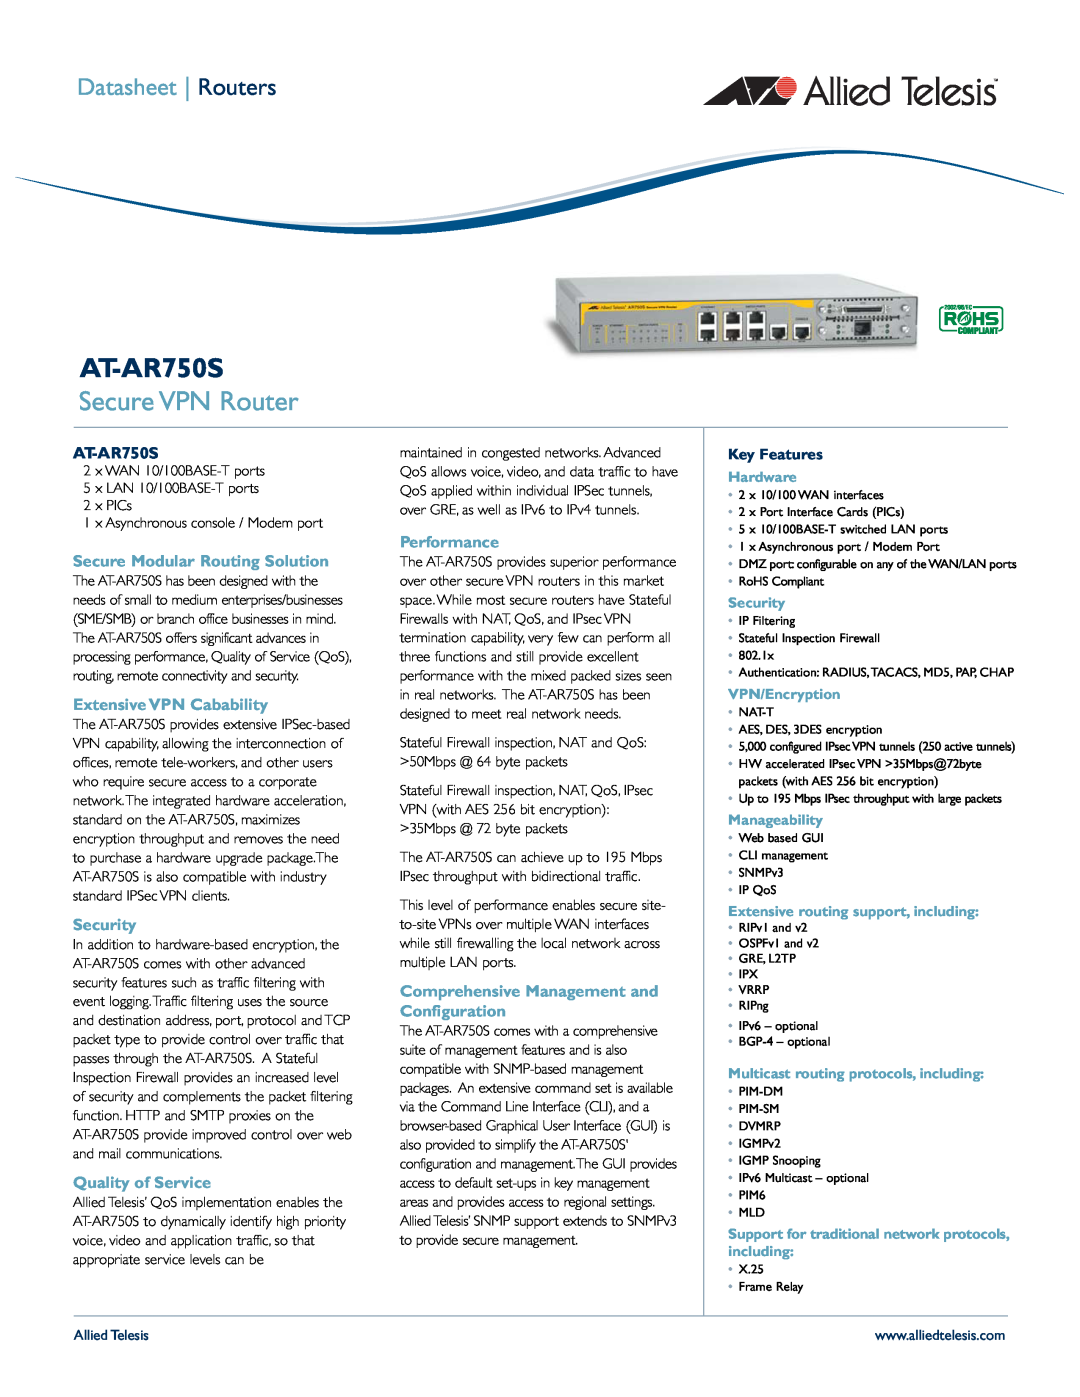 Allied Telesis AT-AR750S manual Secure VPN Router, Key Features, Datasheet Routers, Hardware, Security, VPN/Encryption 